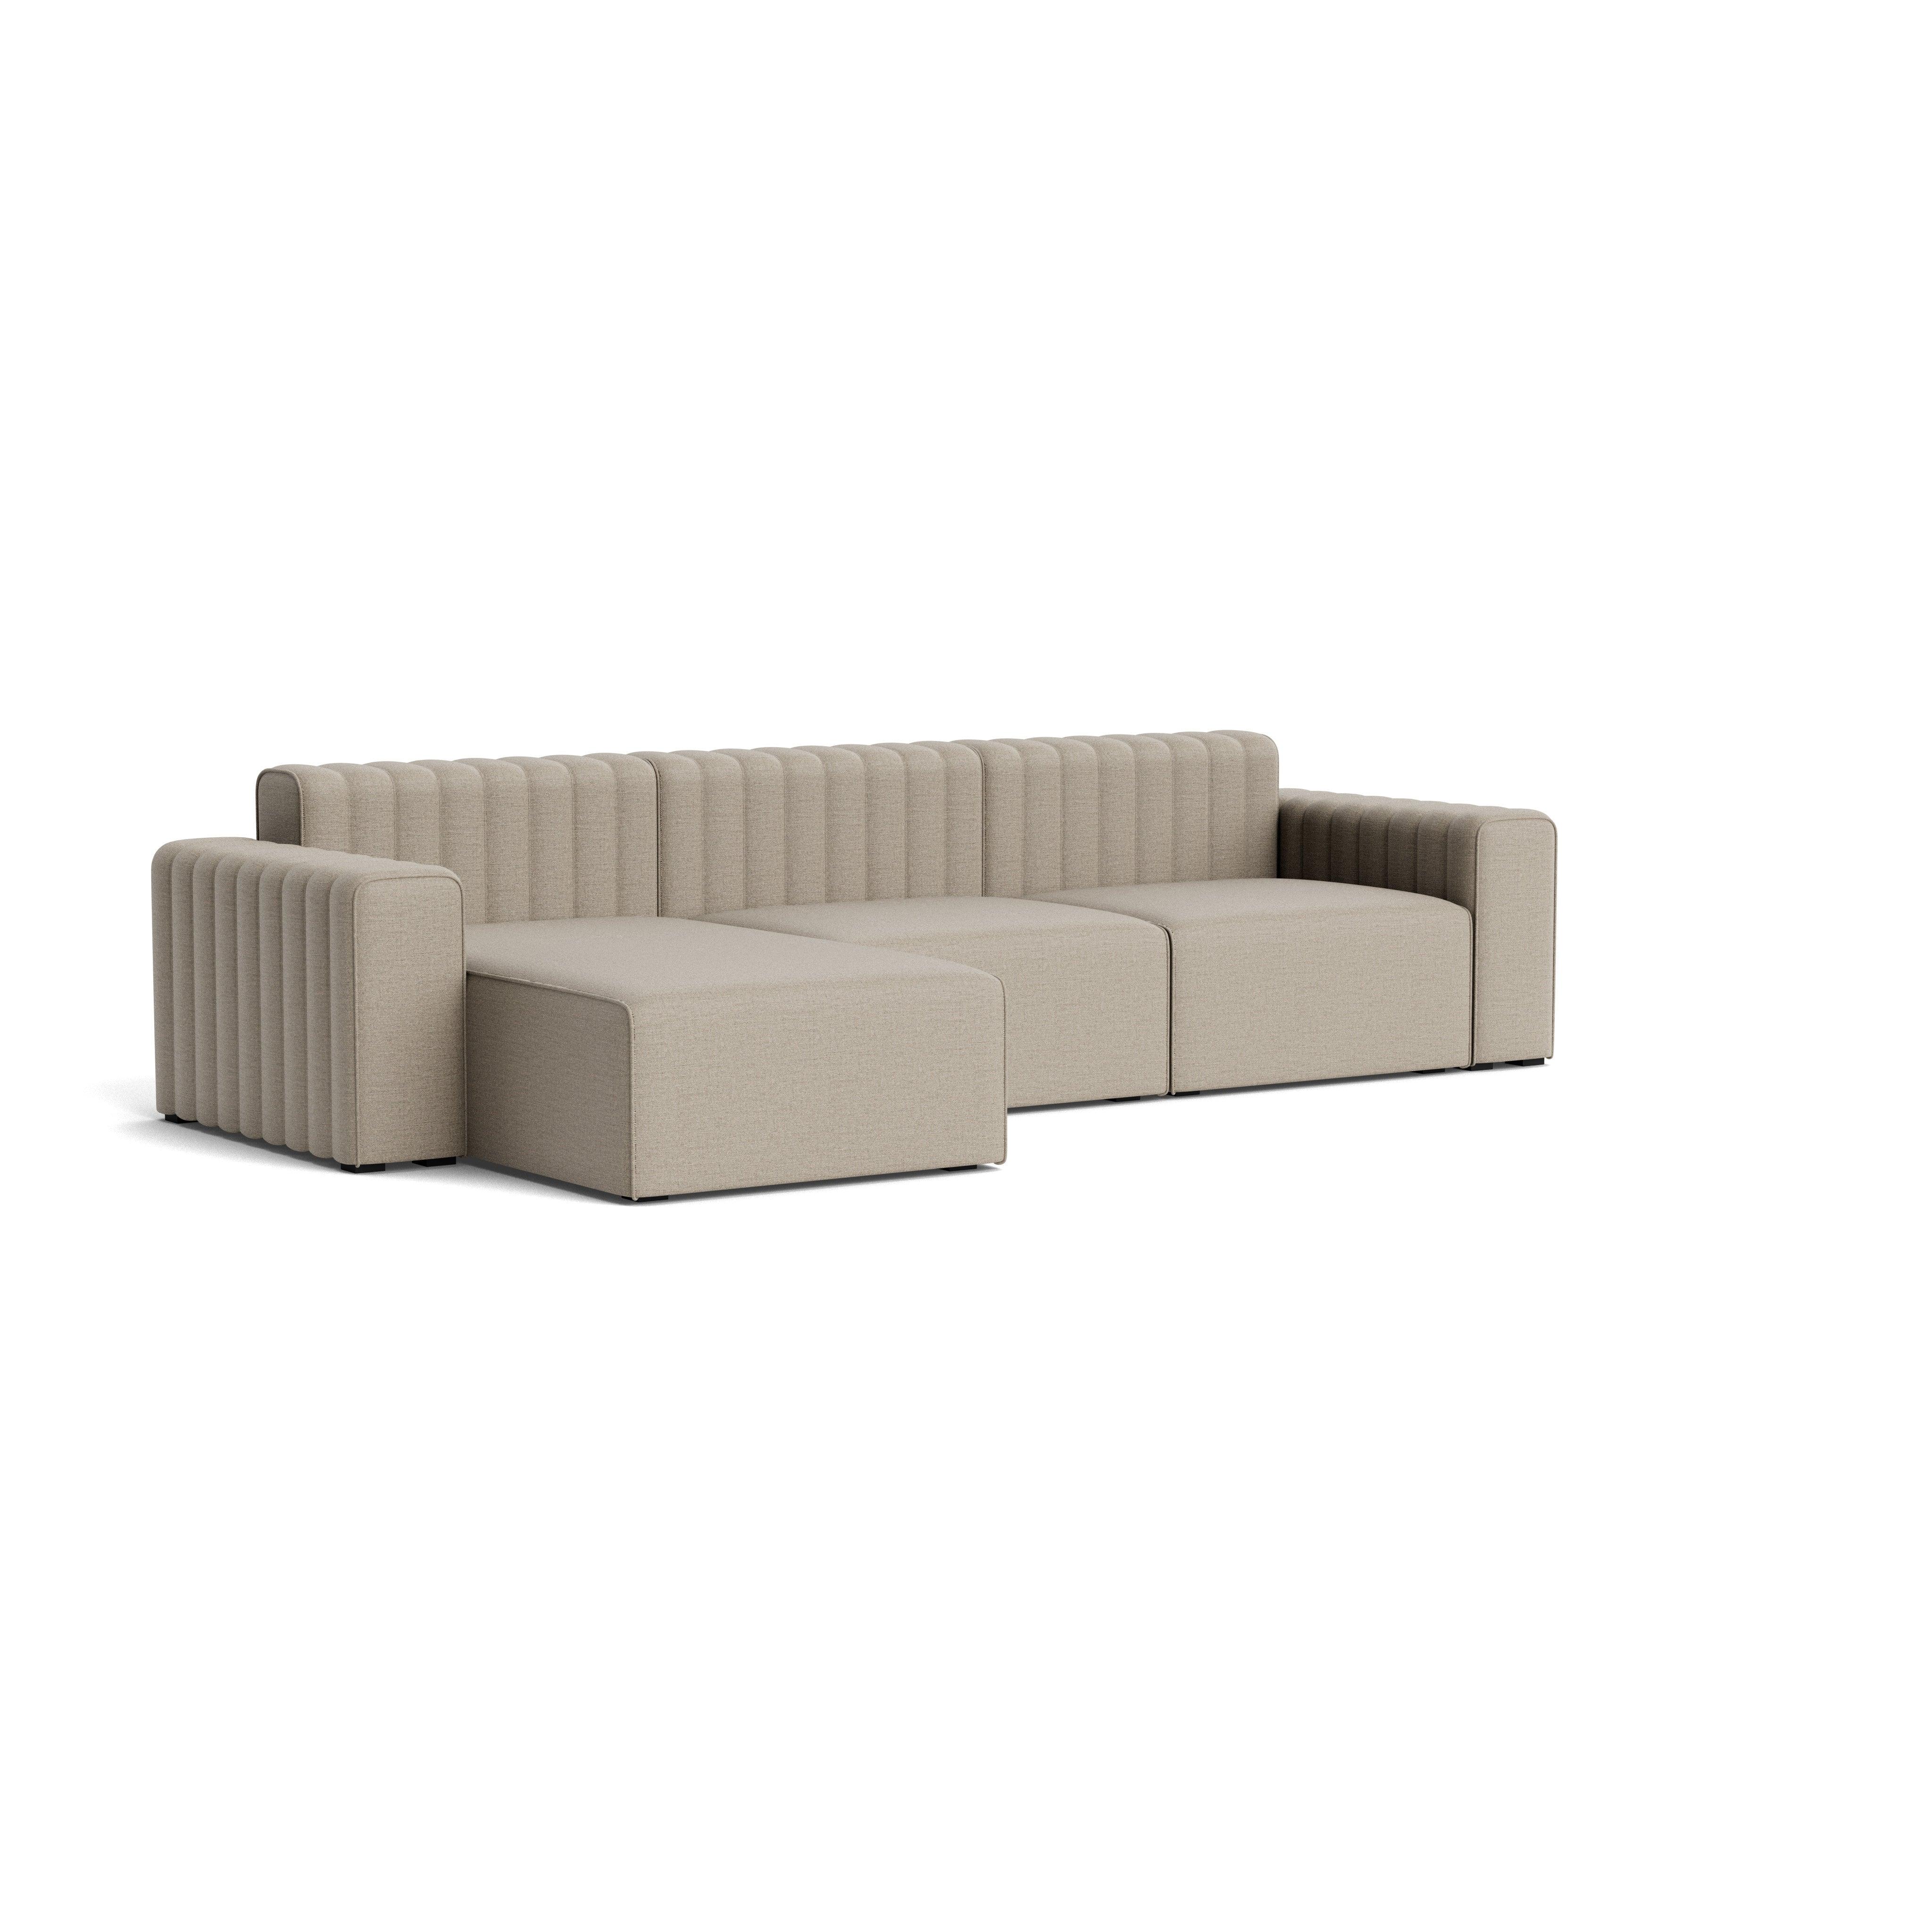 RIFF Sofa, Three Seater with Chaise Lounge Right (Left Arm, Center, Chaise Longue Right) - Nina - Linen Col 2 - PARIS14A.RO